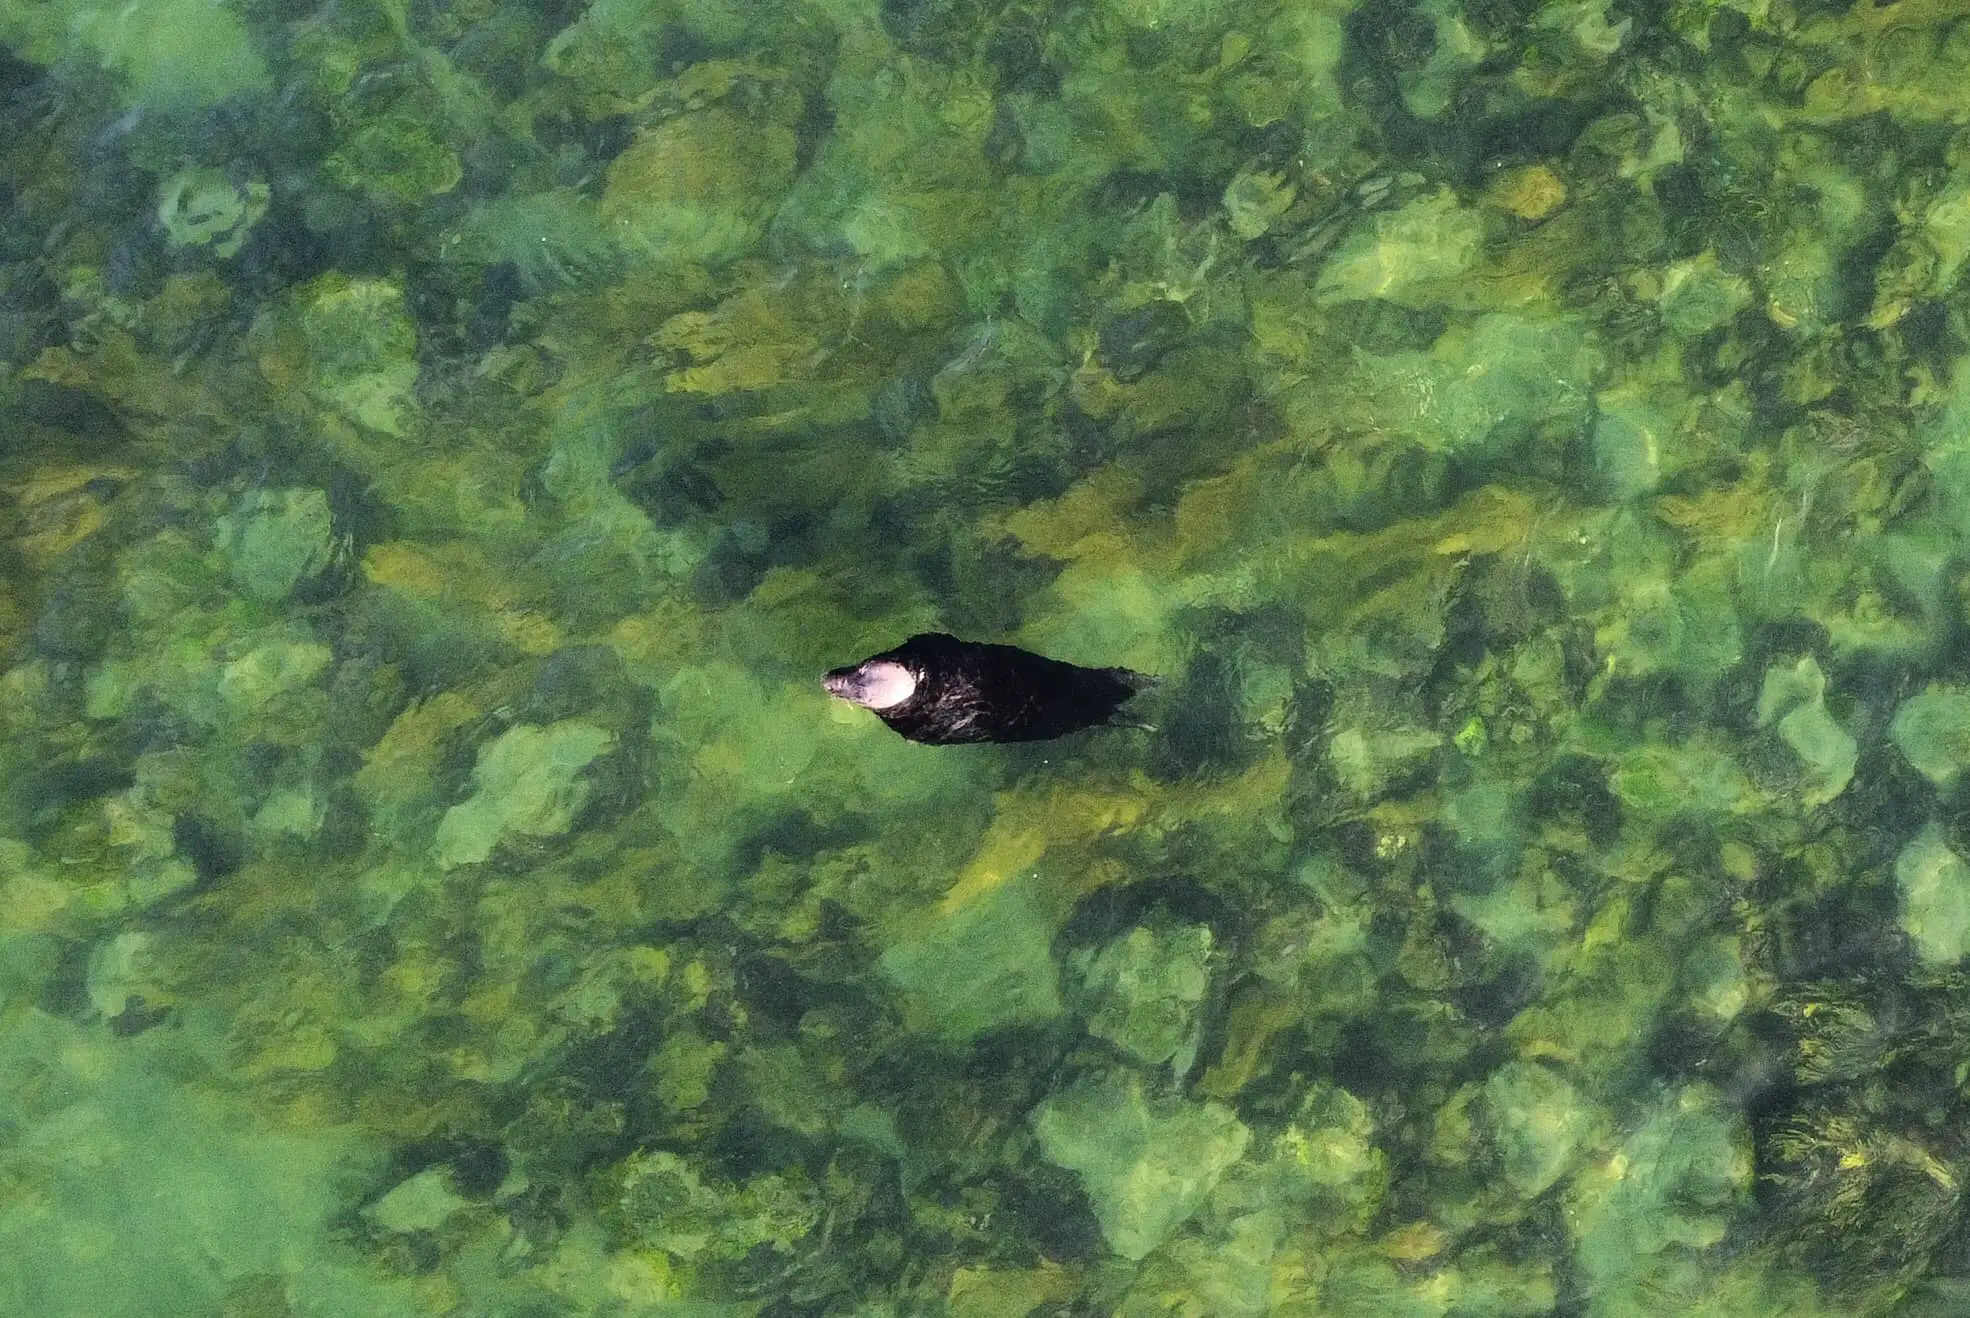 Seal in the clear water - taken from above